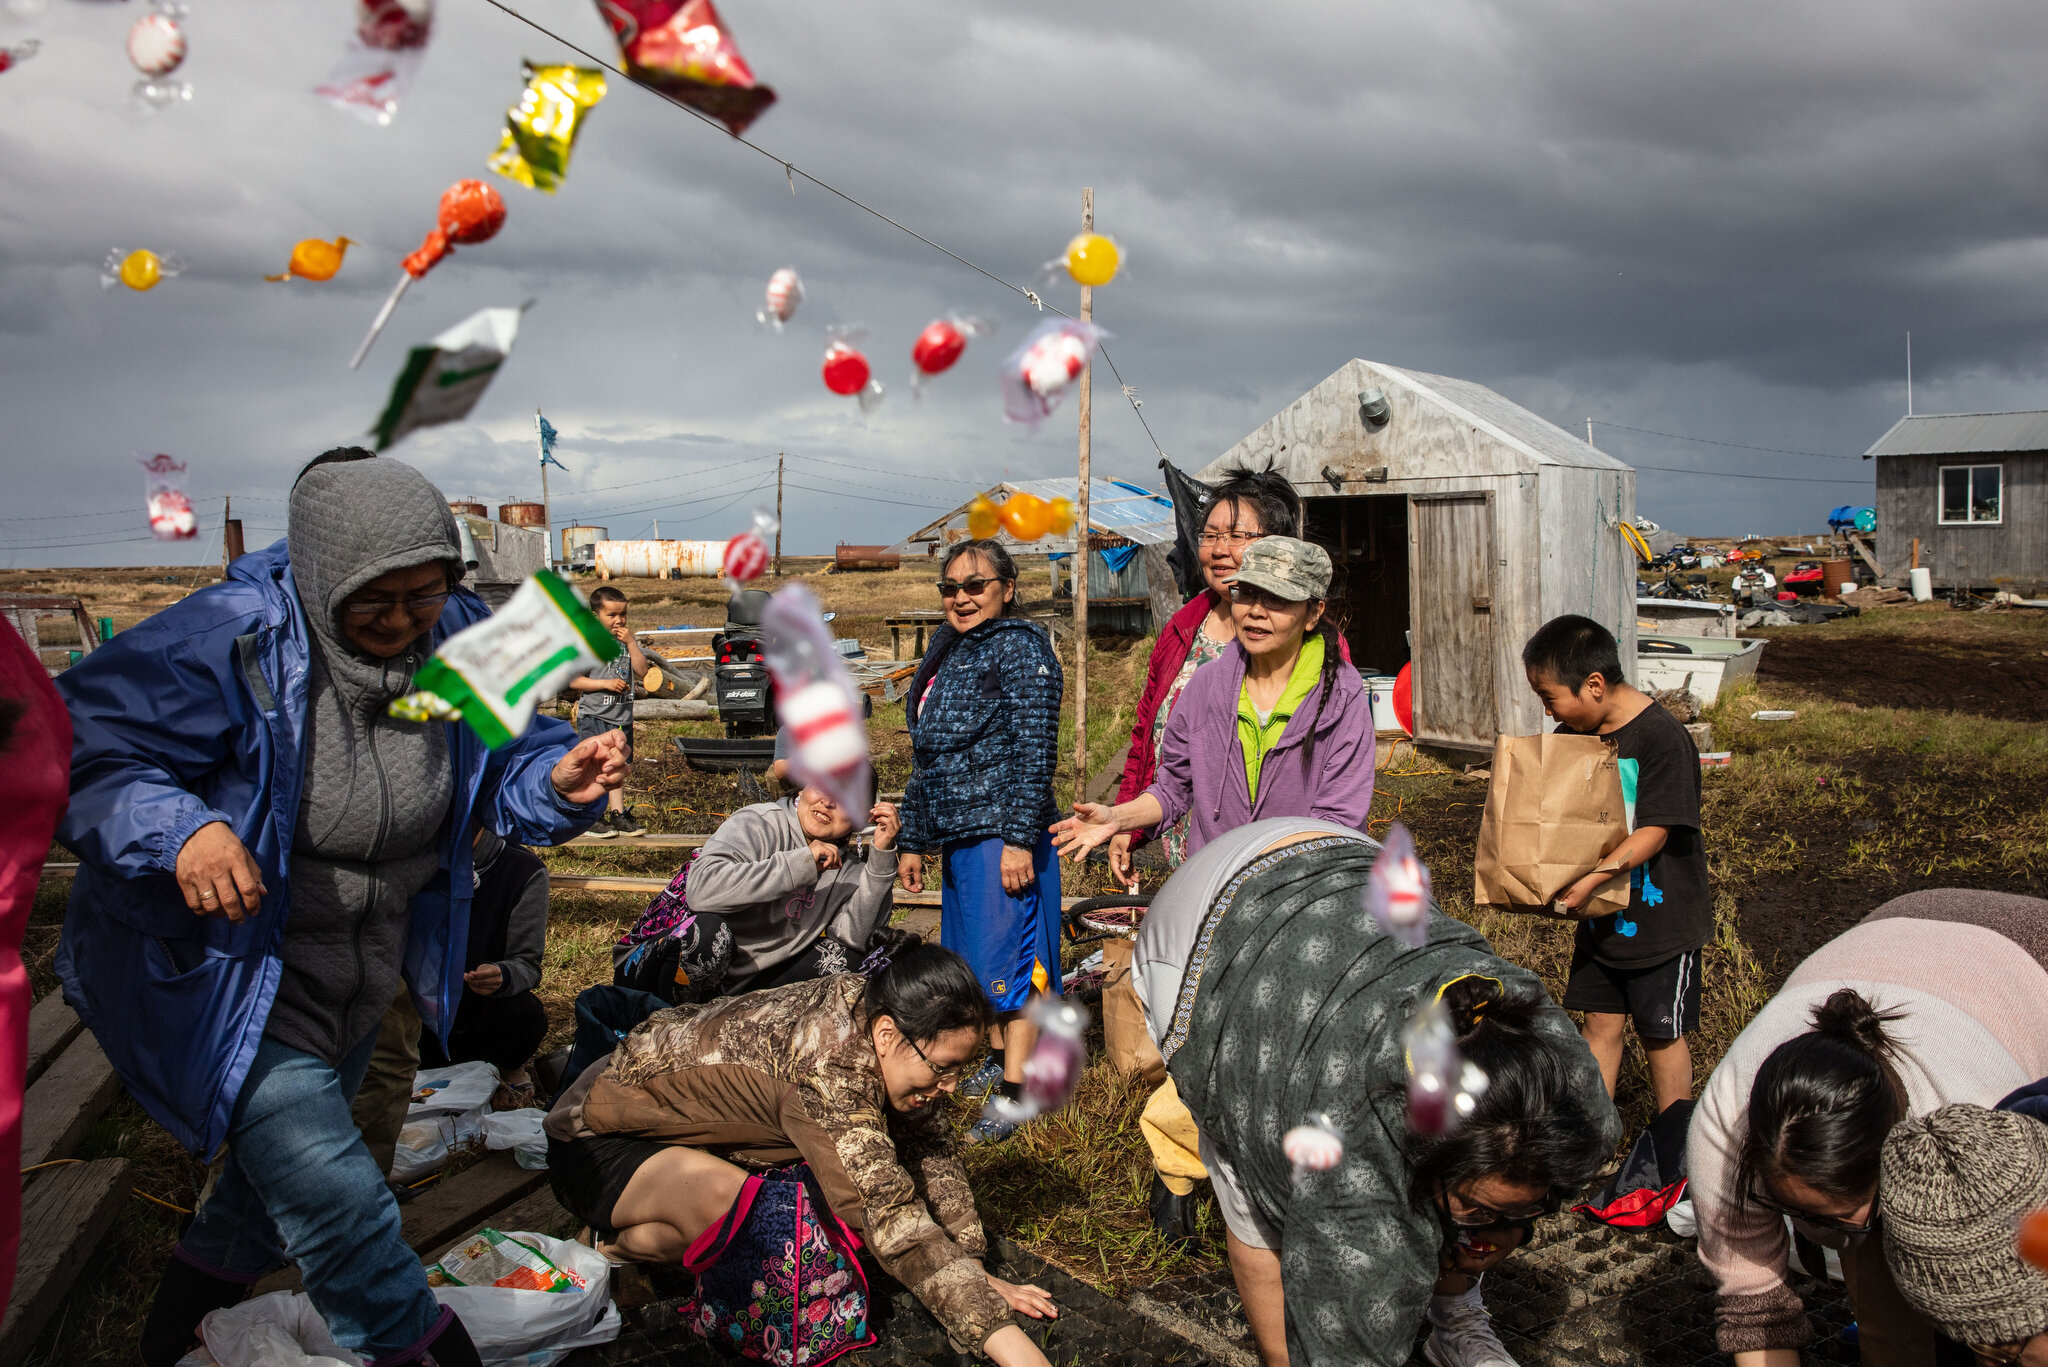  Women gather at the home of Lisa and Jeff Charles in Newtok, Alaska, a Yupik village of roughly 380 people,  for a traditional hunting celebration after their daughter Rayna's first successful ptarmigan hunt. The Charles family gifted the birds to e